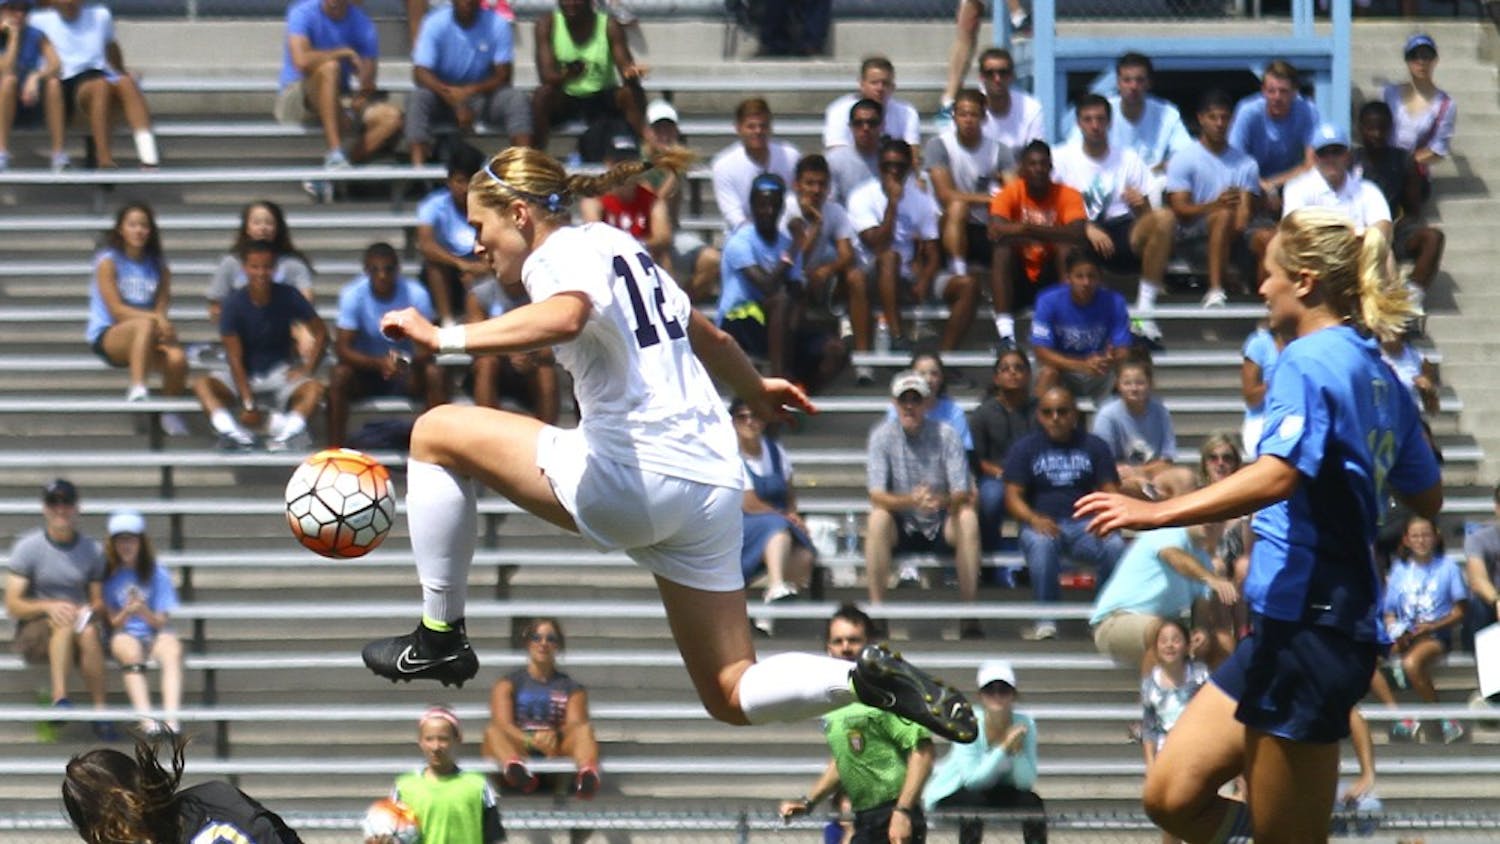 The UNC soccer team defeated UCLA 3-1 on Sunday Sept. 13. Forward Jessie Scarpa (12) finds a way around UCLA keeper Arielle Schechtman (00) to score her second goal of the game and bring the score to 3-1.